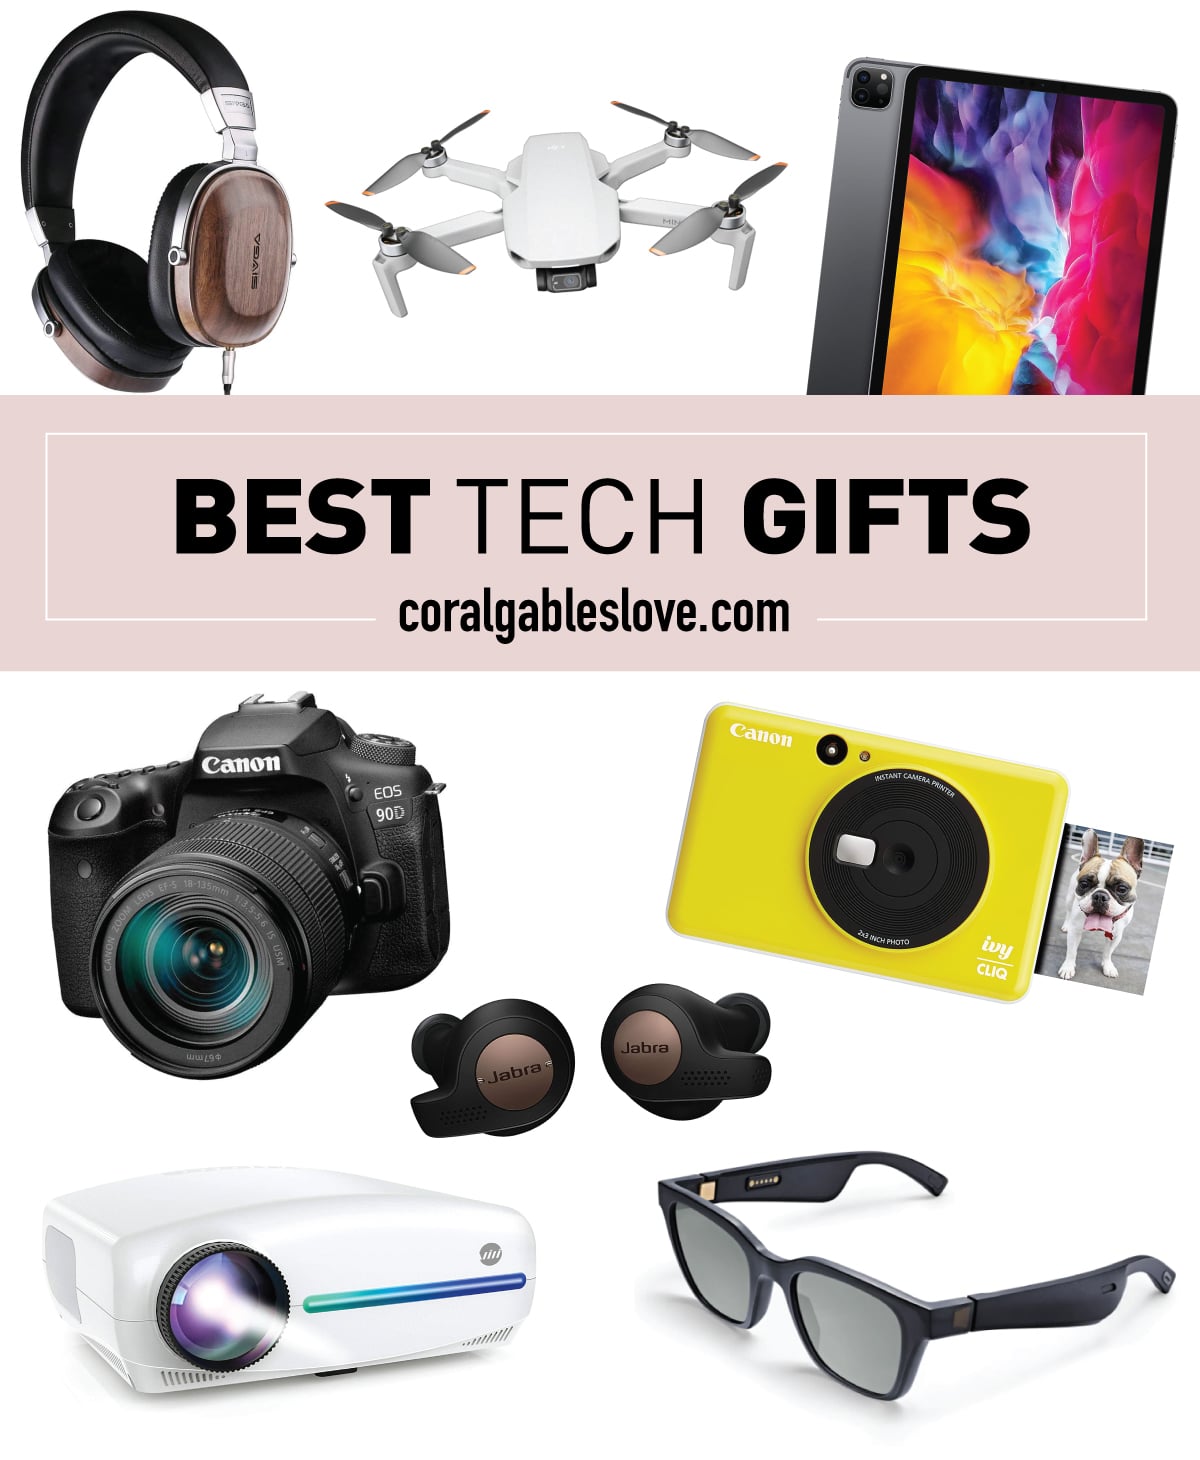 The Best Tech Gifts for Women